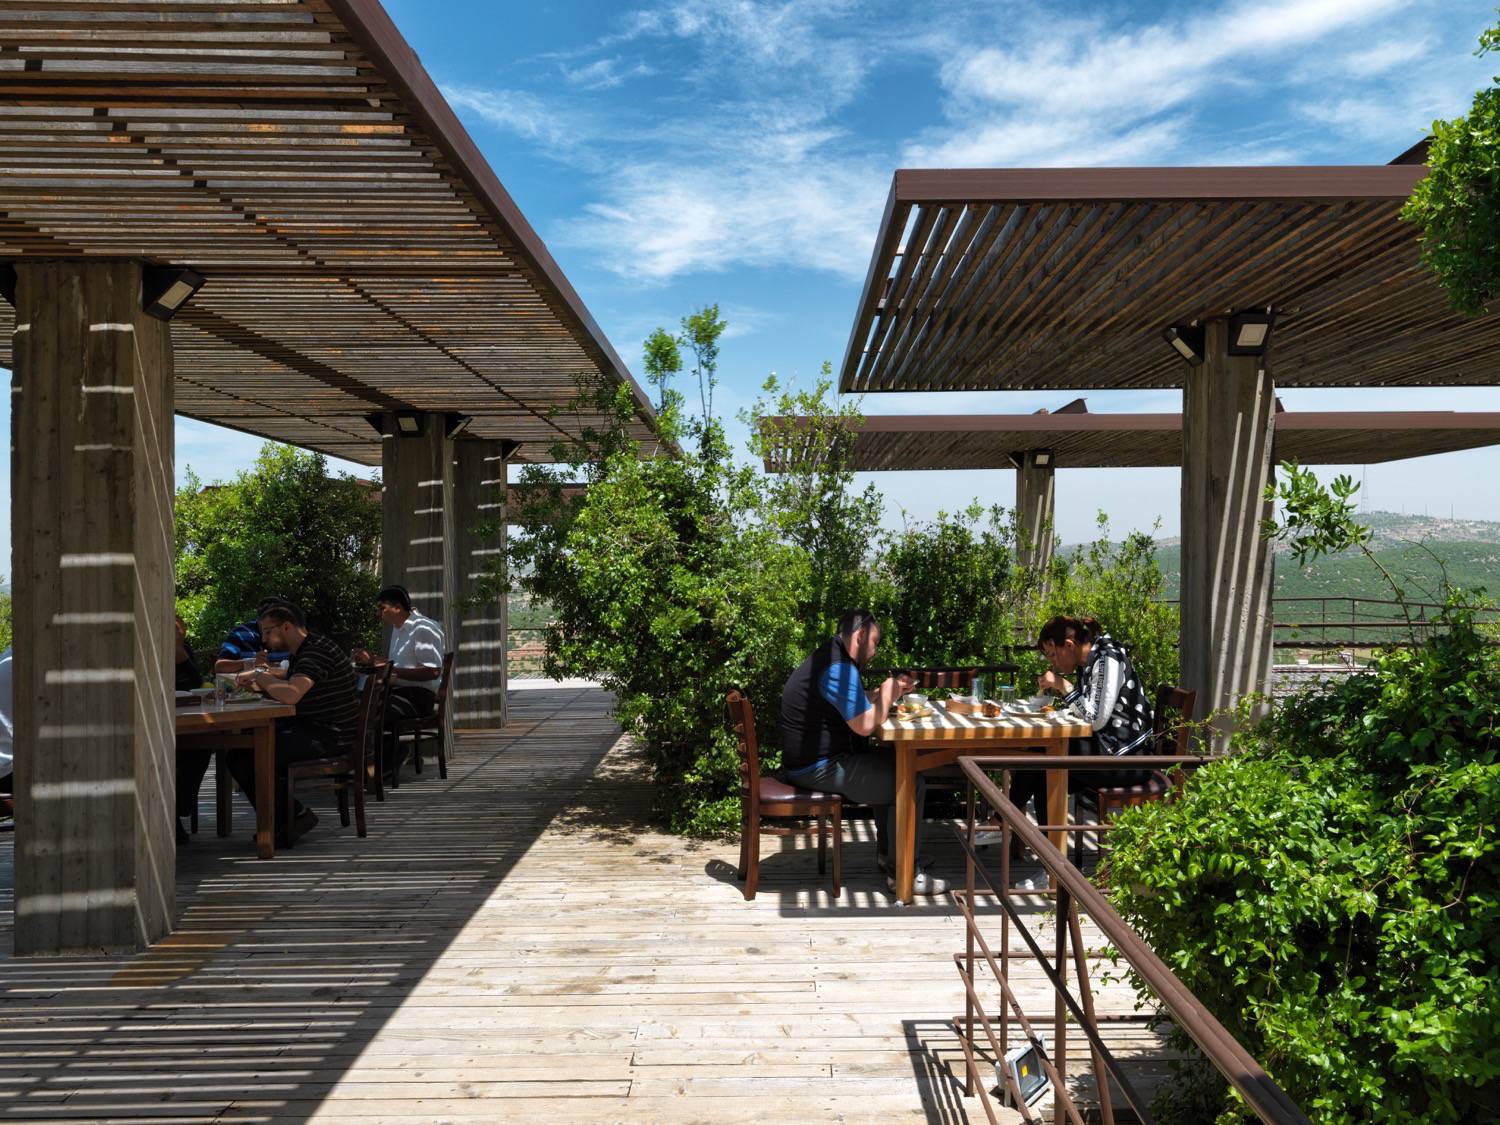 Restaurant terrace interacting with the oak forest, emphasising the main purpose of the academy to protect and spread awareness about the threatened rare forests in Jordan